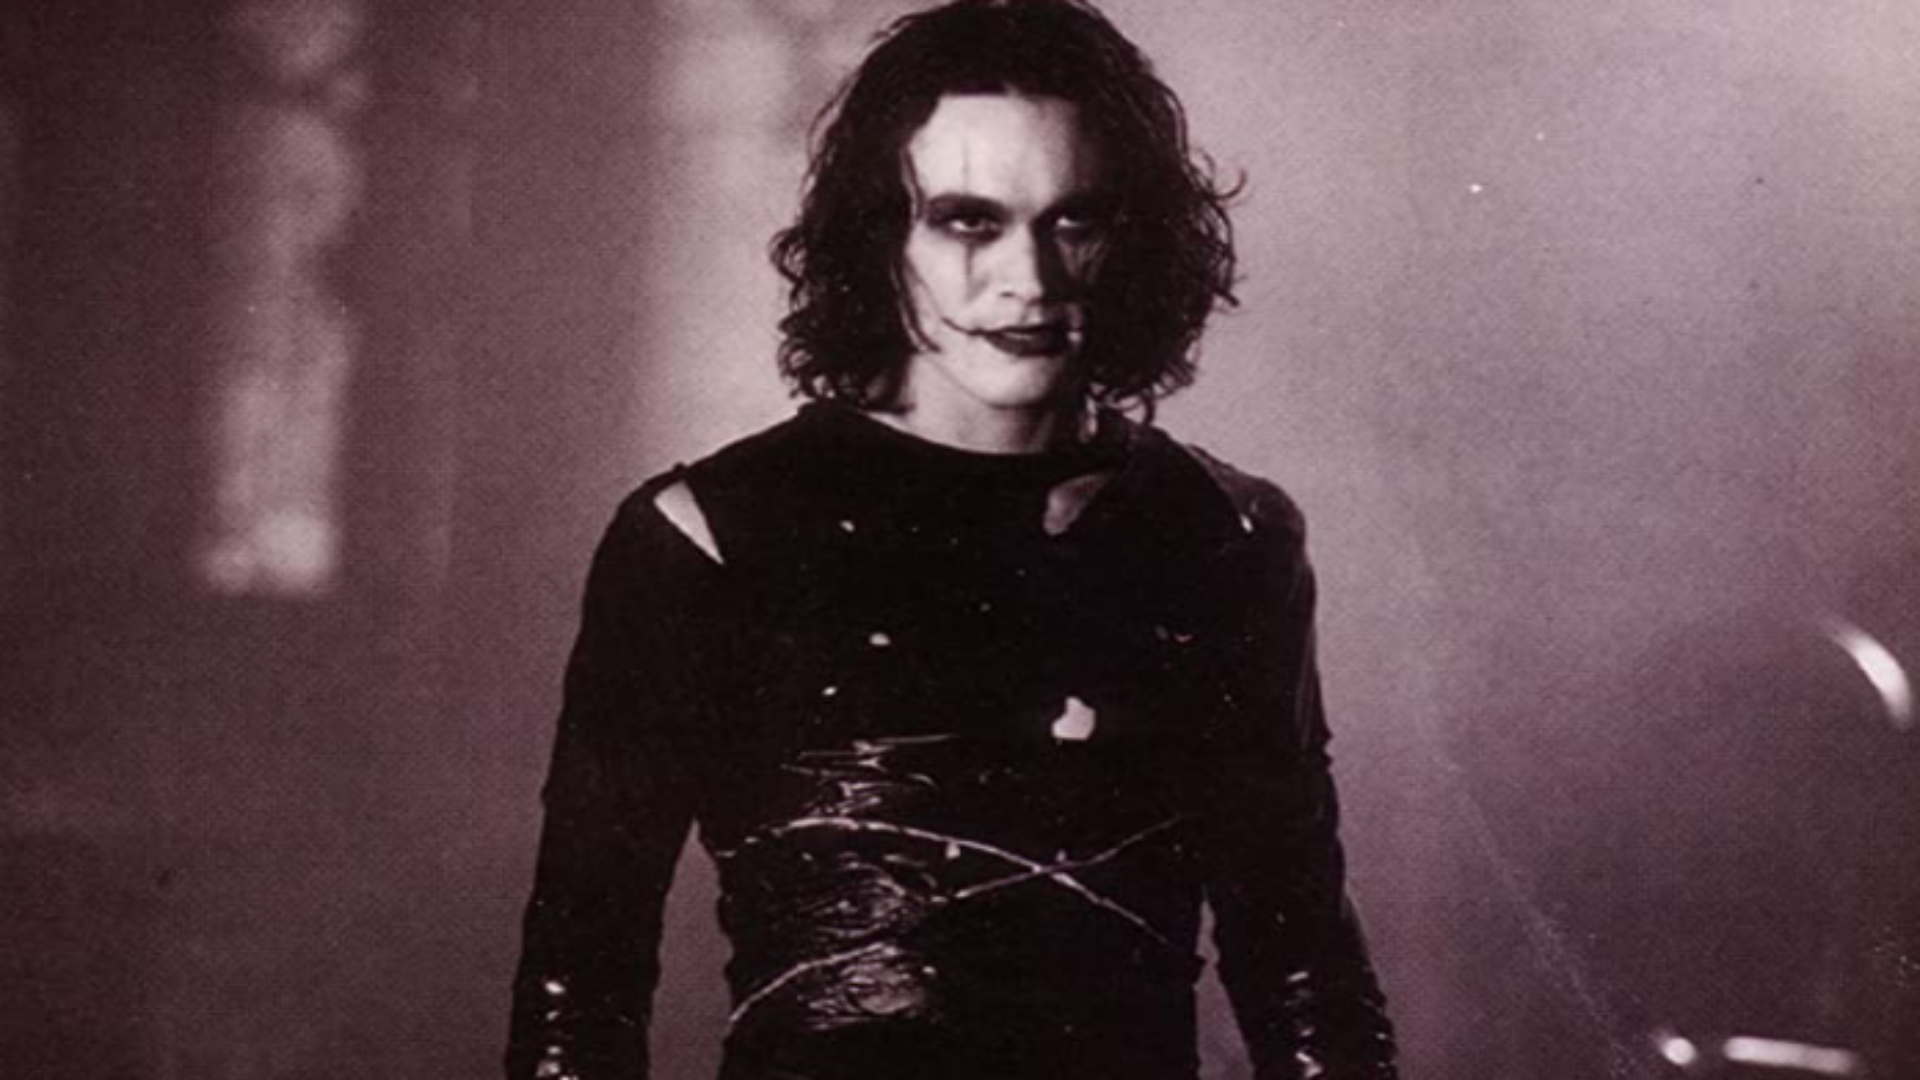 Why The Crow deserves a comeback